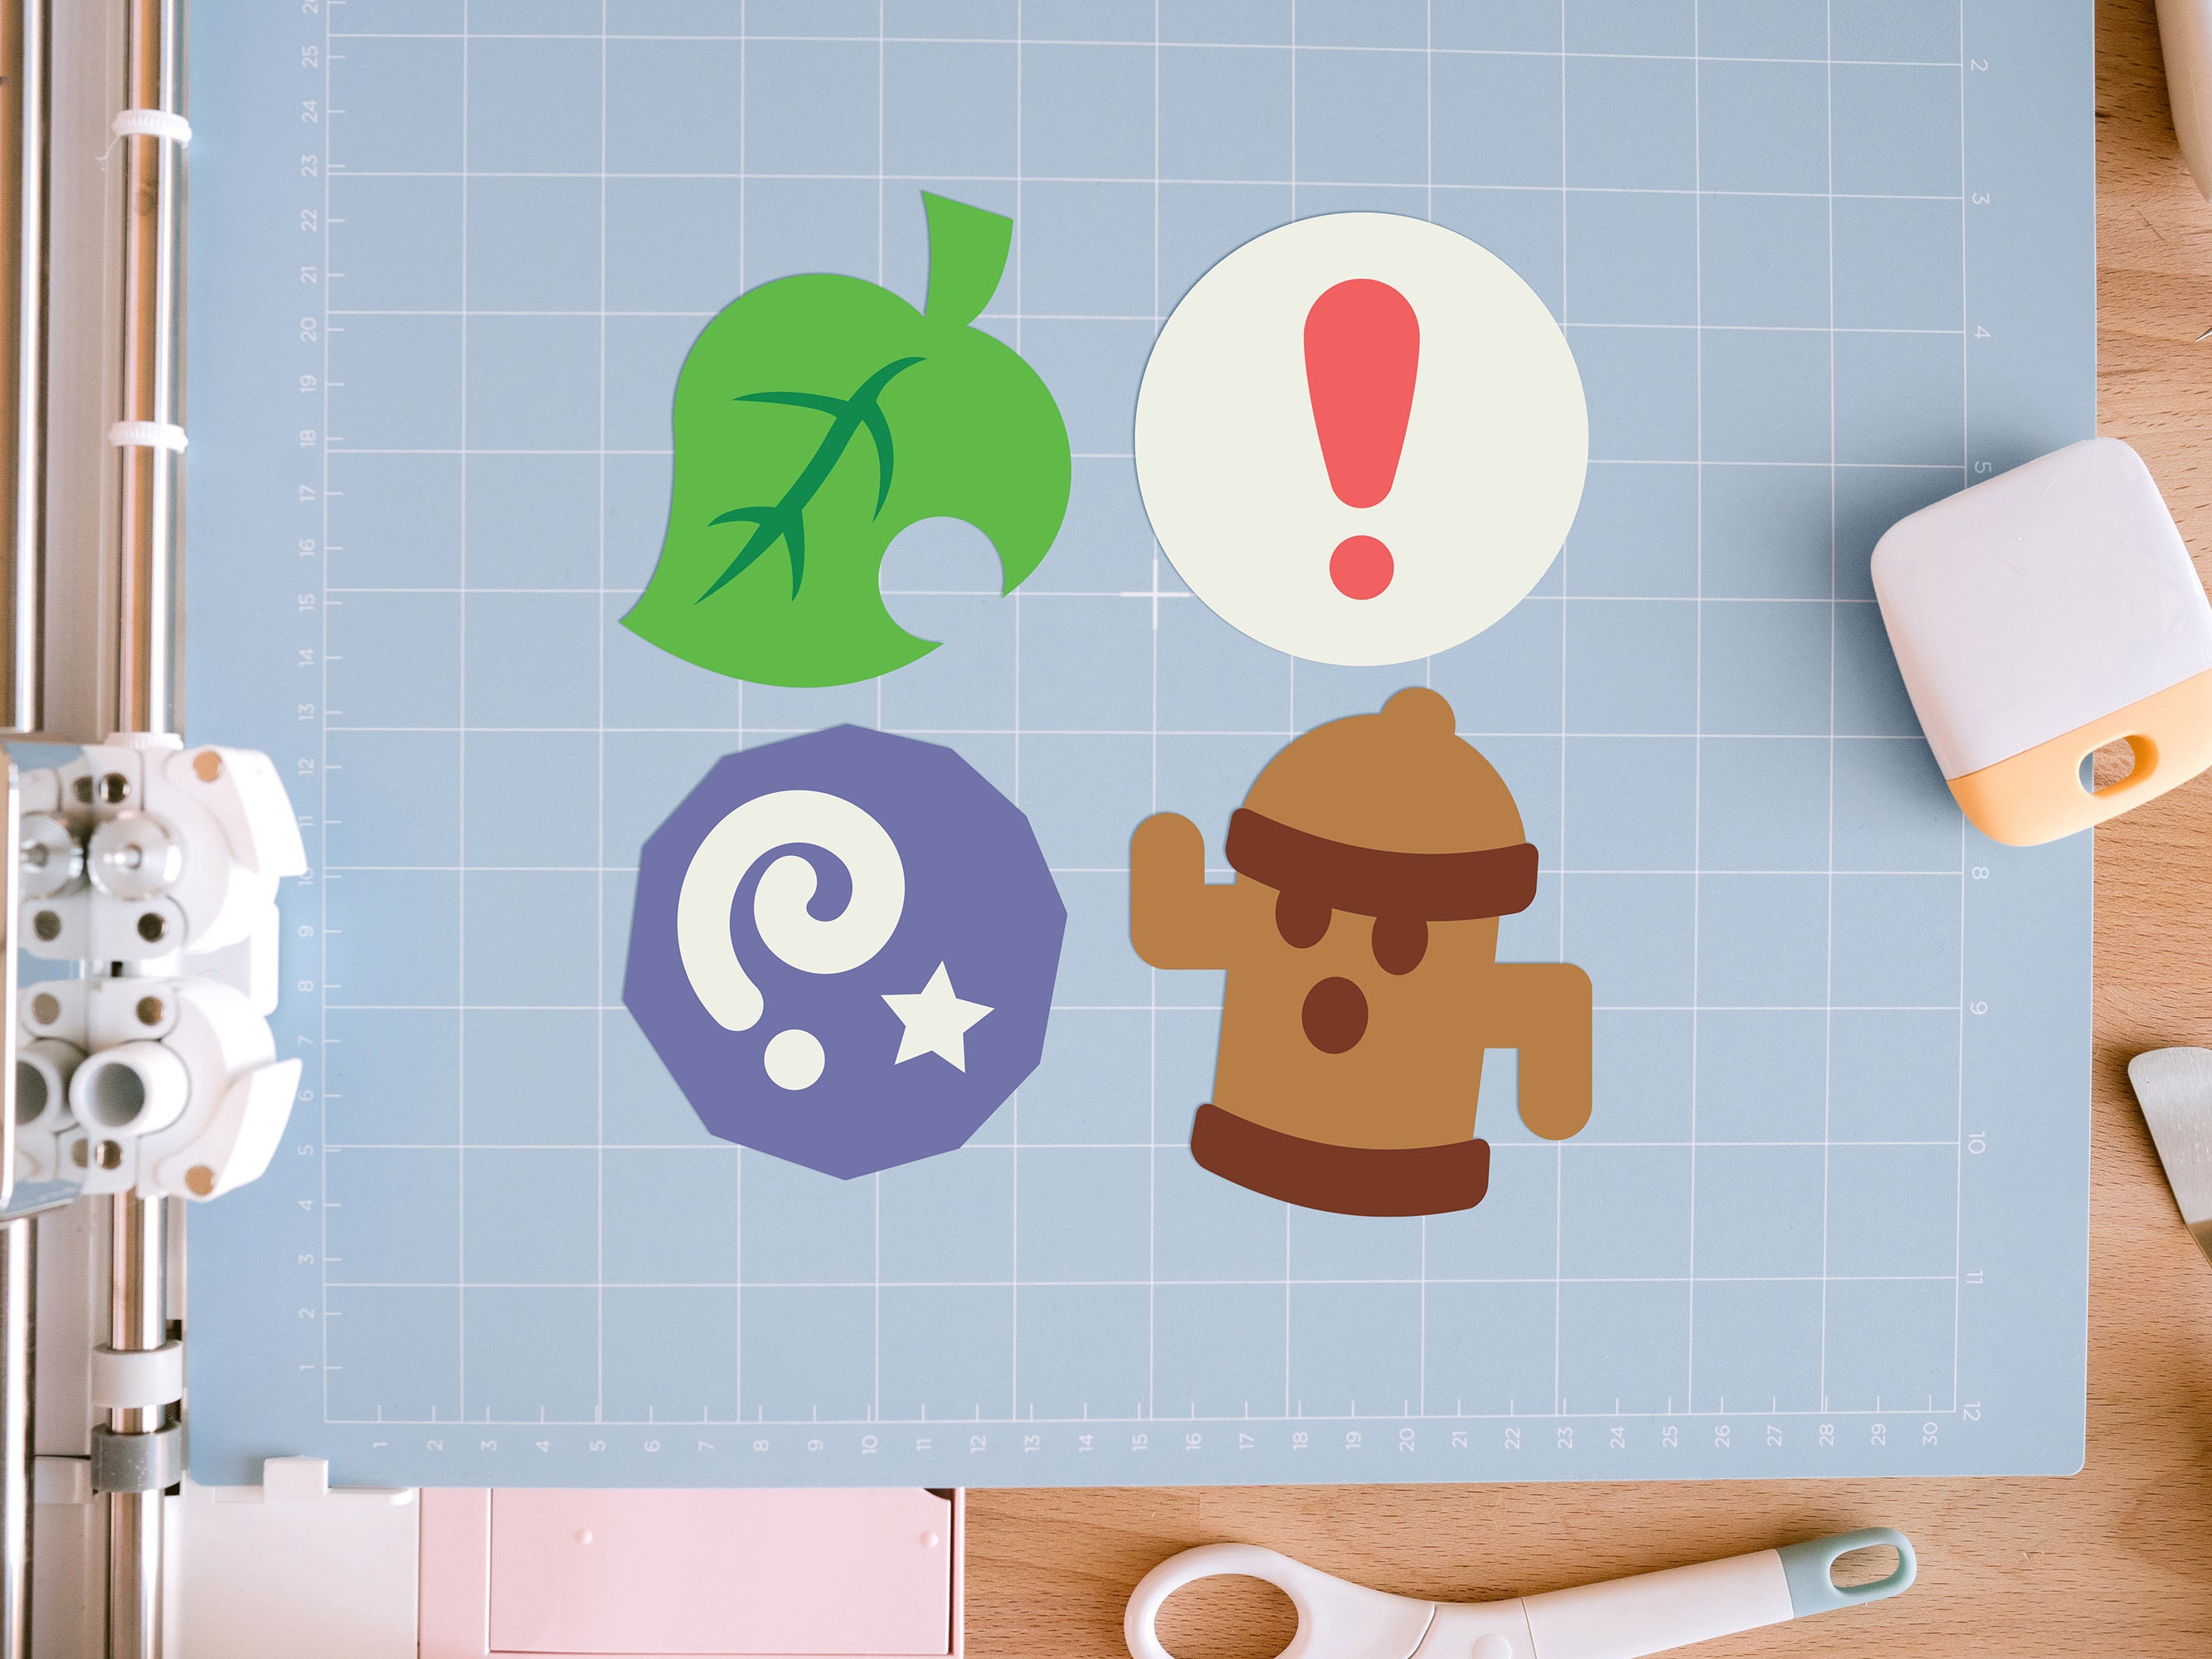 Download Animal Crossing Icons: Fossil Pitfall Seed Gyroid Furniture | Etsy